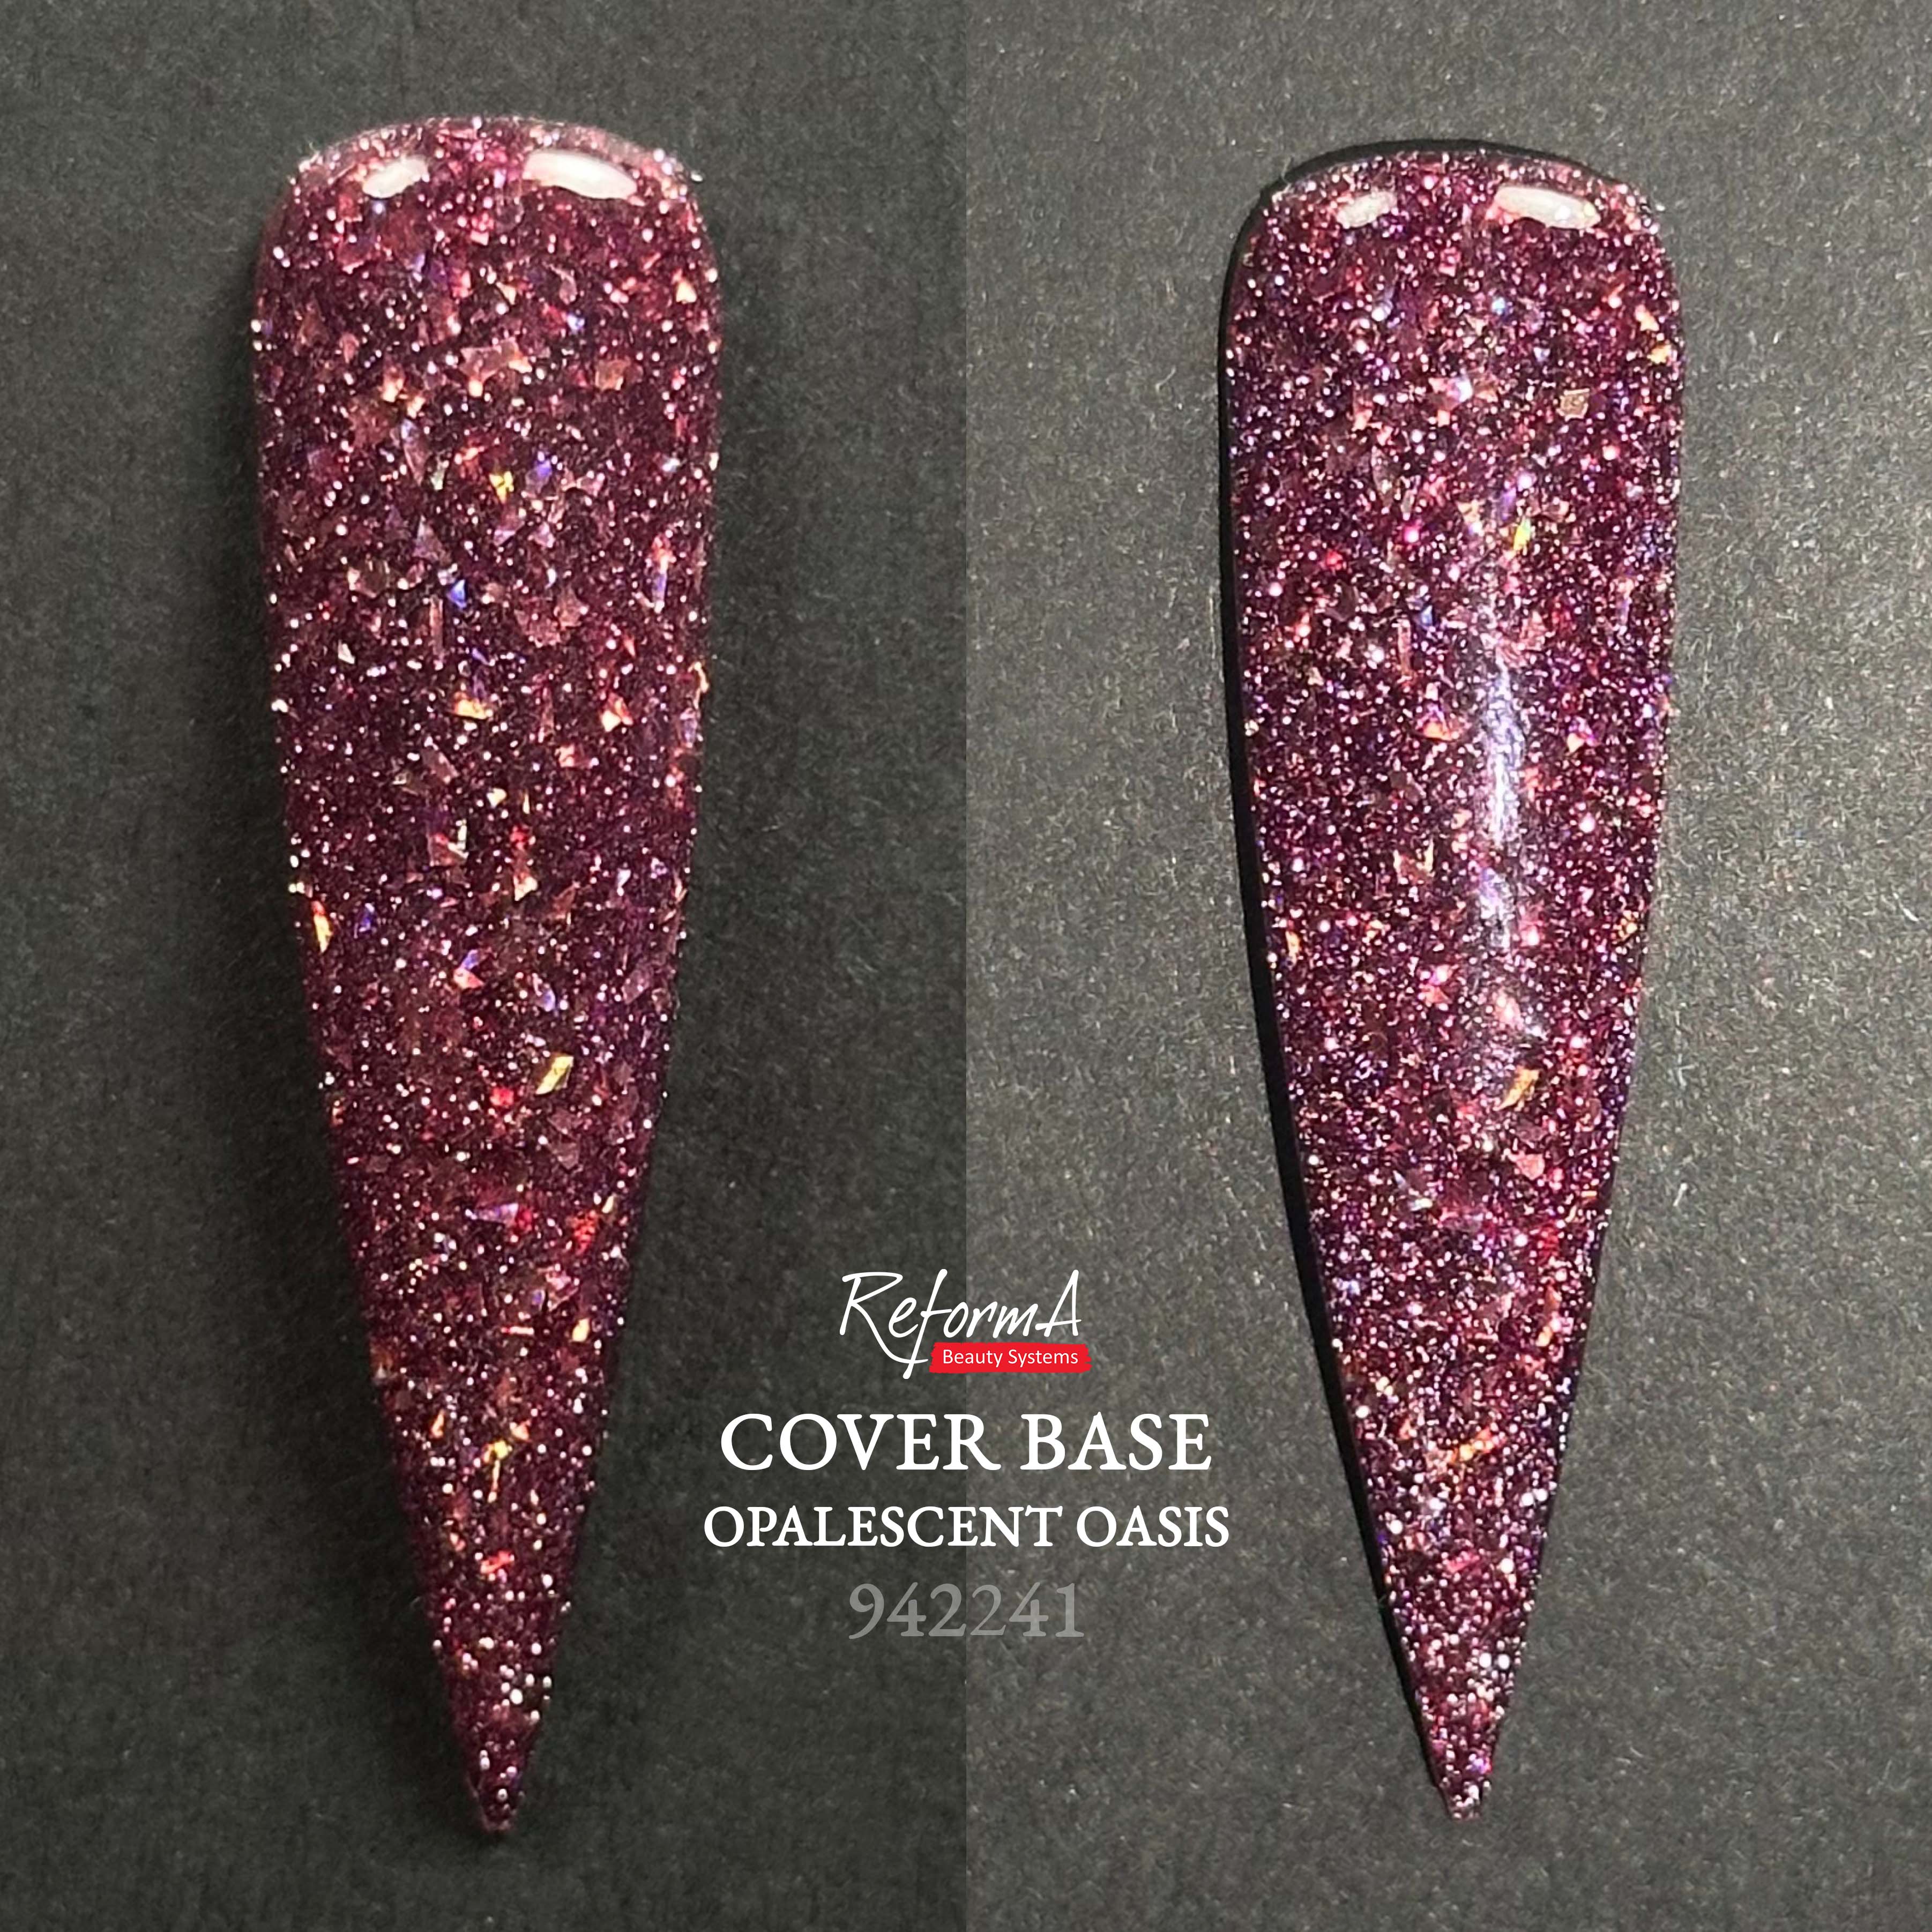 Cover Base - Opalescent Oasis, 10 ml